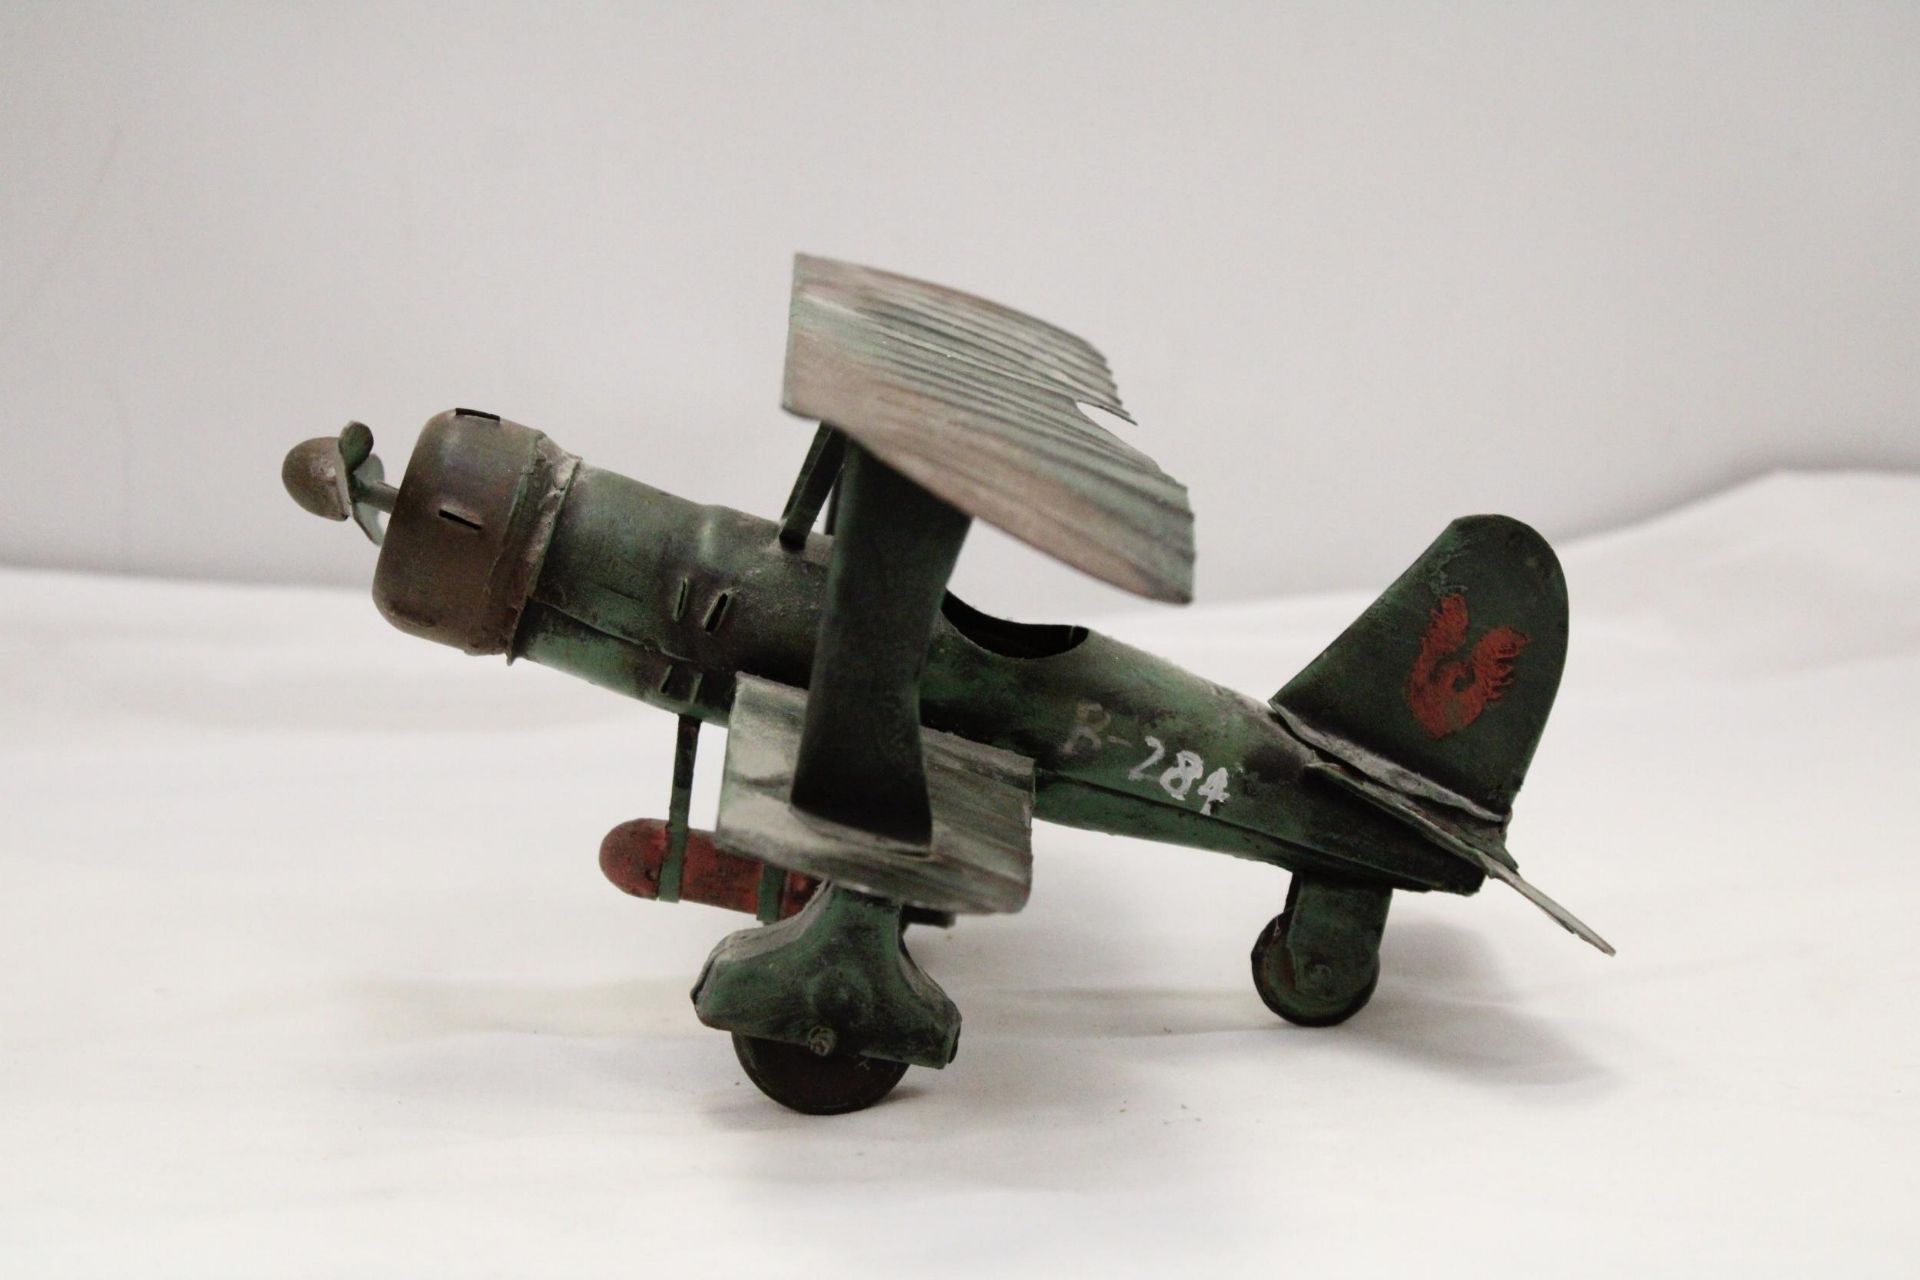 A U.S.A TIN PLATE BI-PLANE APPROXIMATELY 13CM HIGH BY 23CM LONG - Image 4 of 5